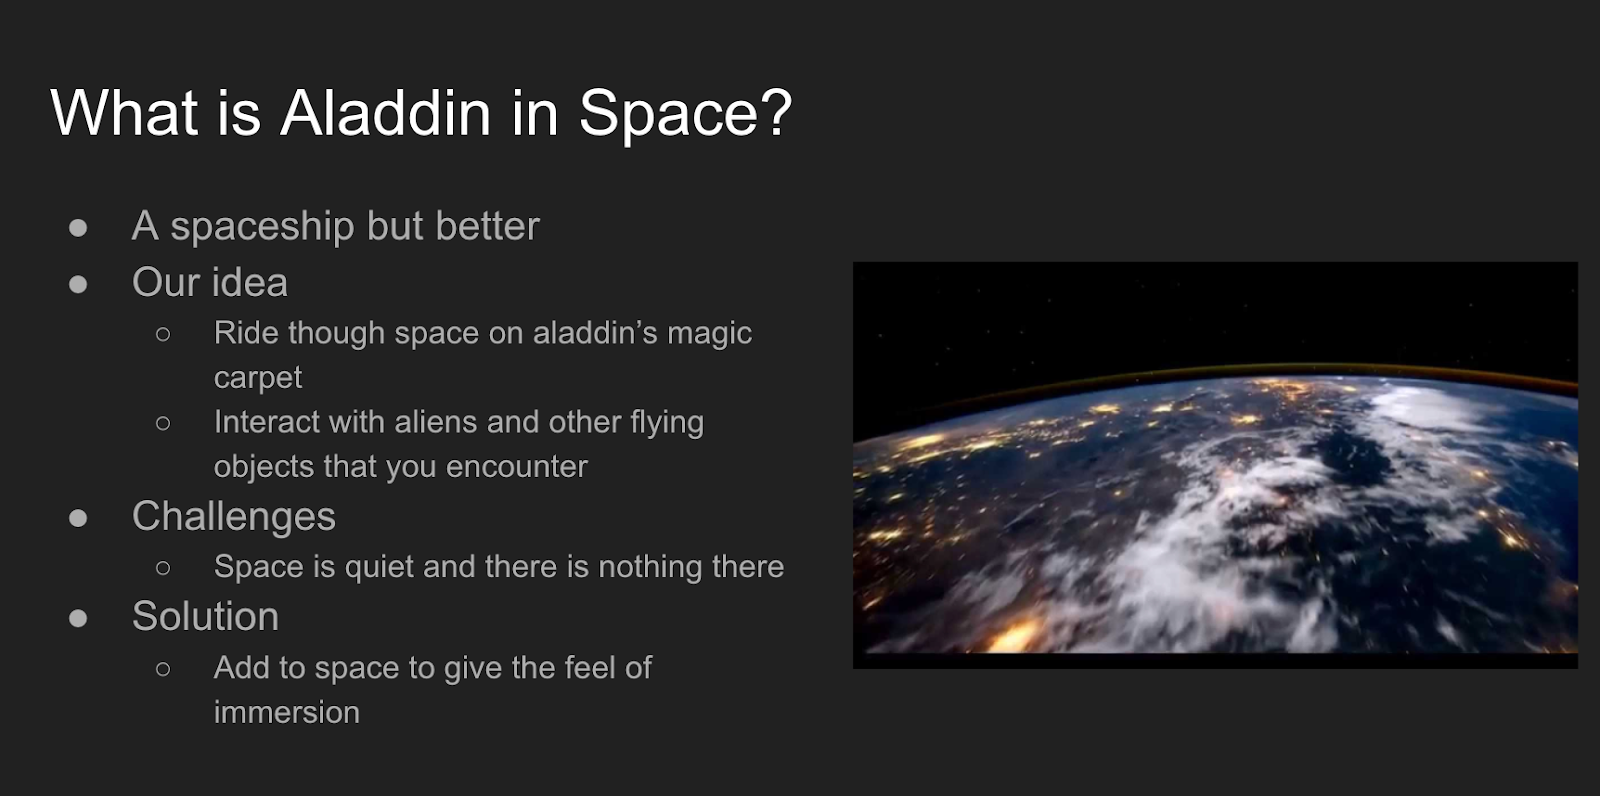 Powerpoint slide titled “What is Aladdin in Space”, filled with points describing the idea for the design